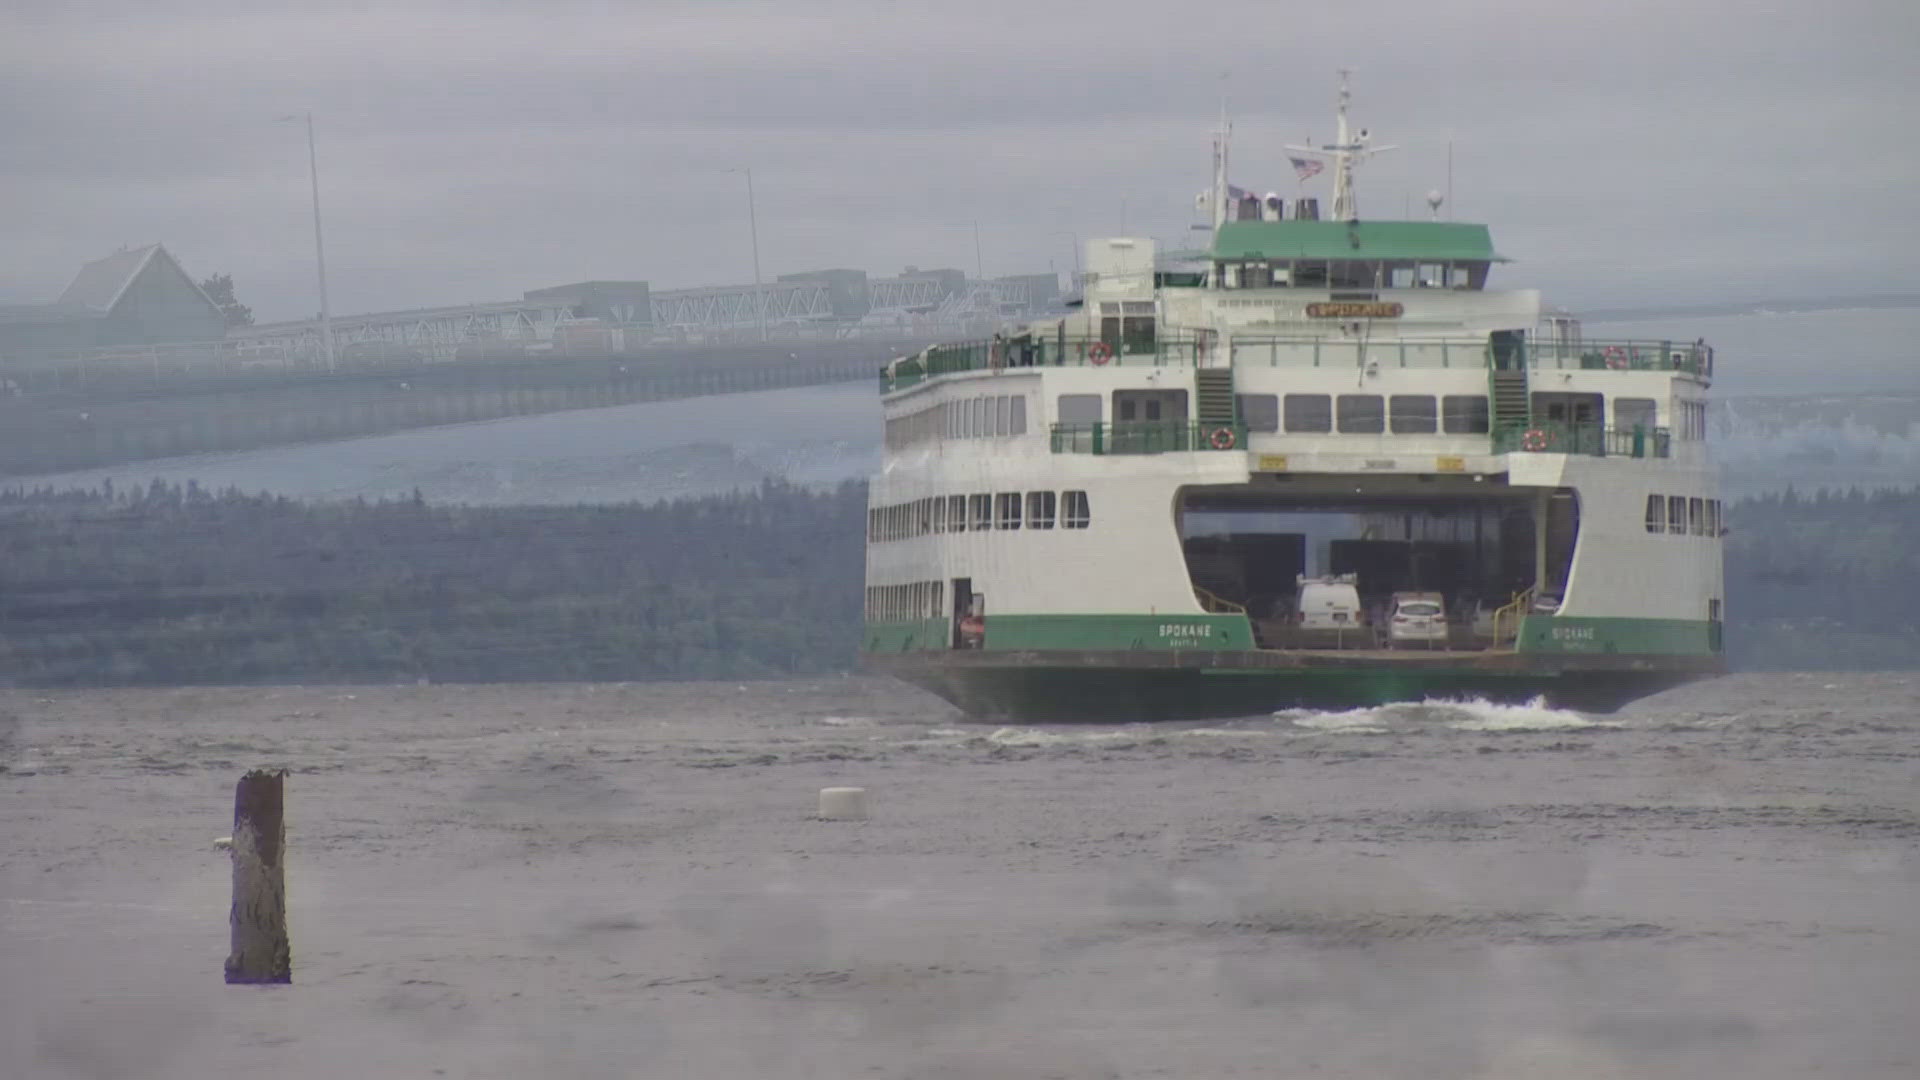 With a busy Memorial Day weekend right around the corner, Washington State Ferries says it would need 9 more boats in service to restore all routes